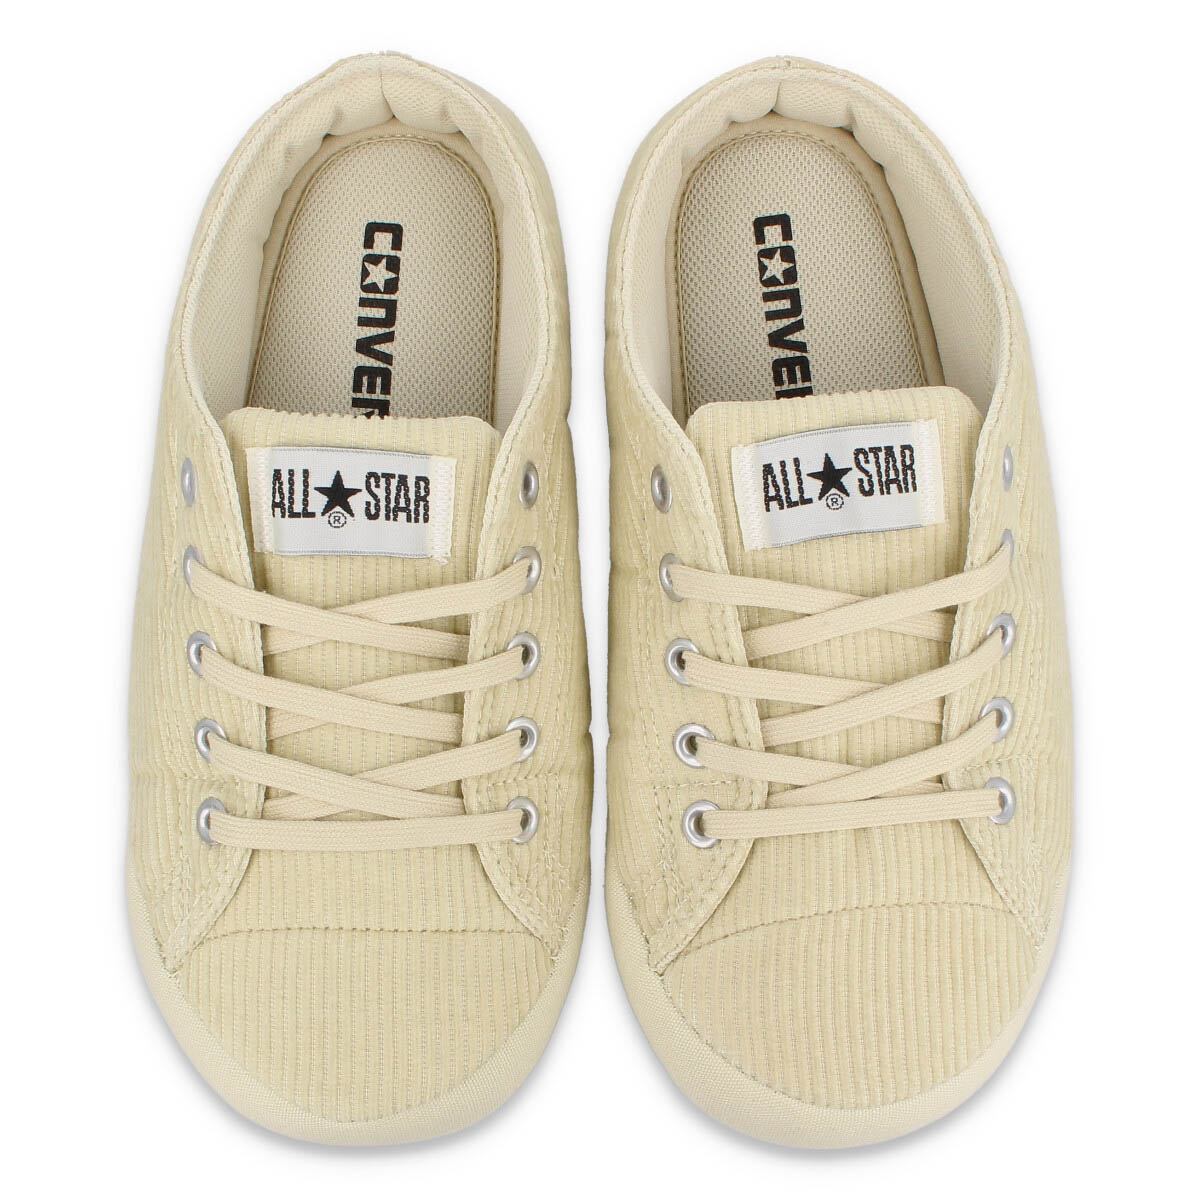 CONVERSE ALL STAR RS CORDUROY OX コンバース オールスター RS コーデュロイ OX OFF WHITE 31306931